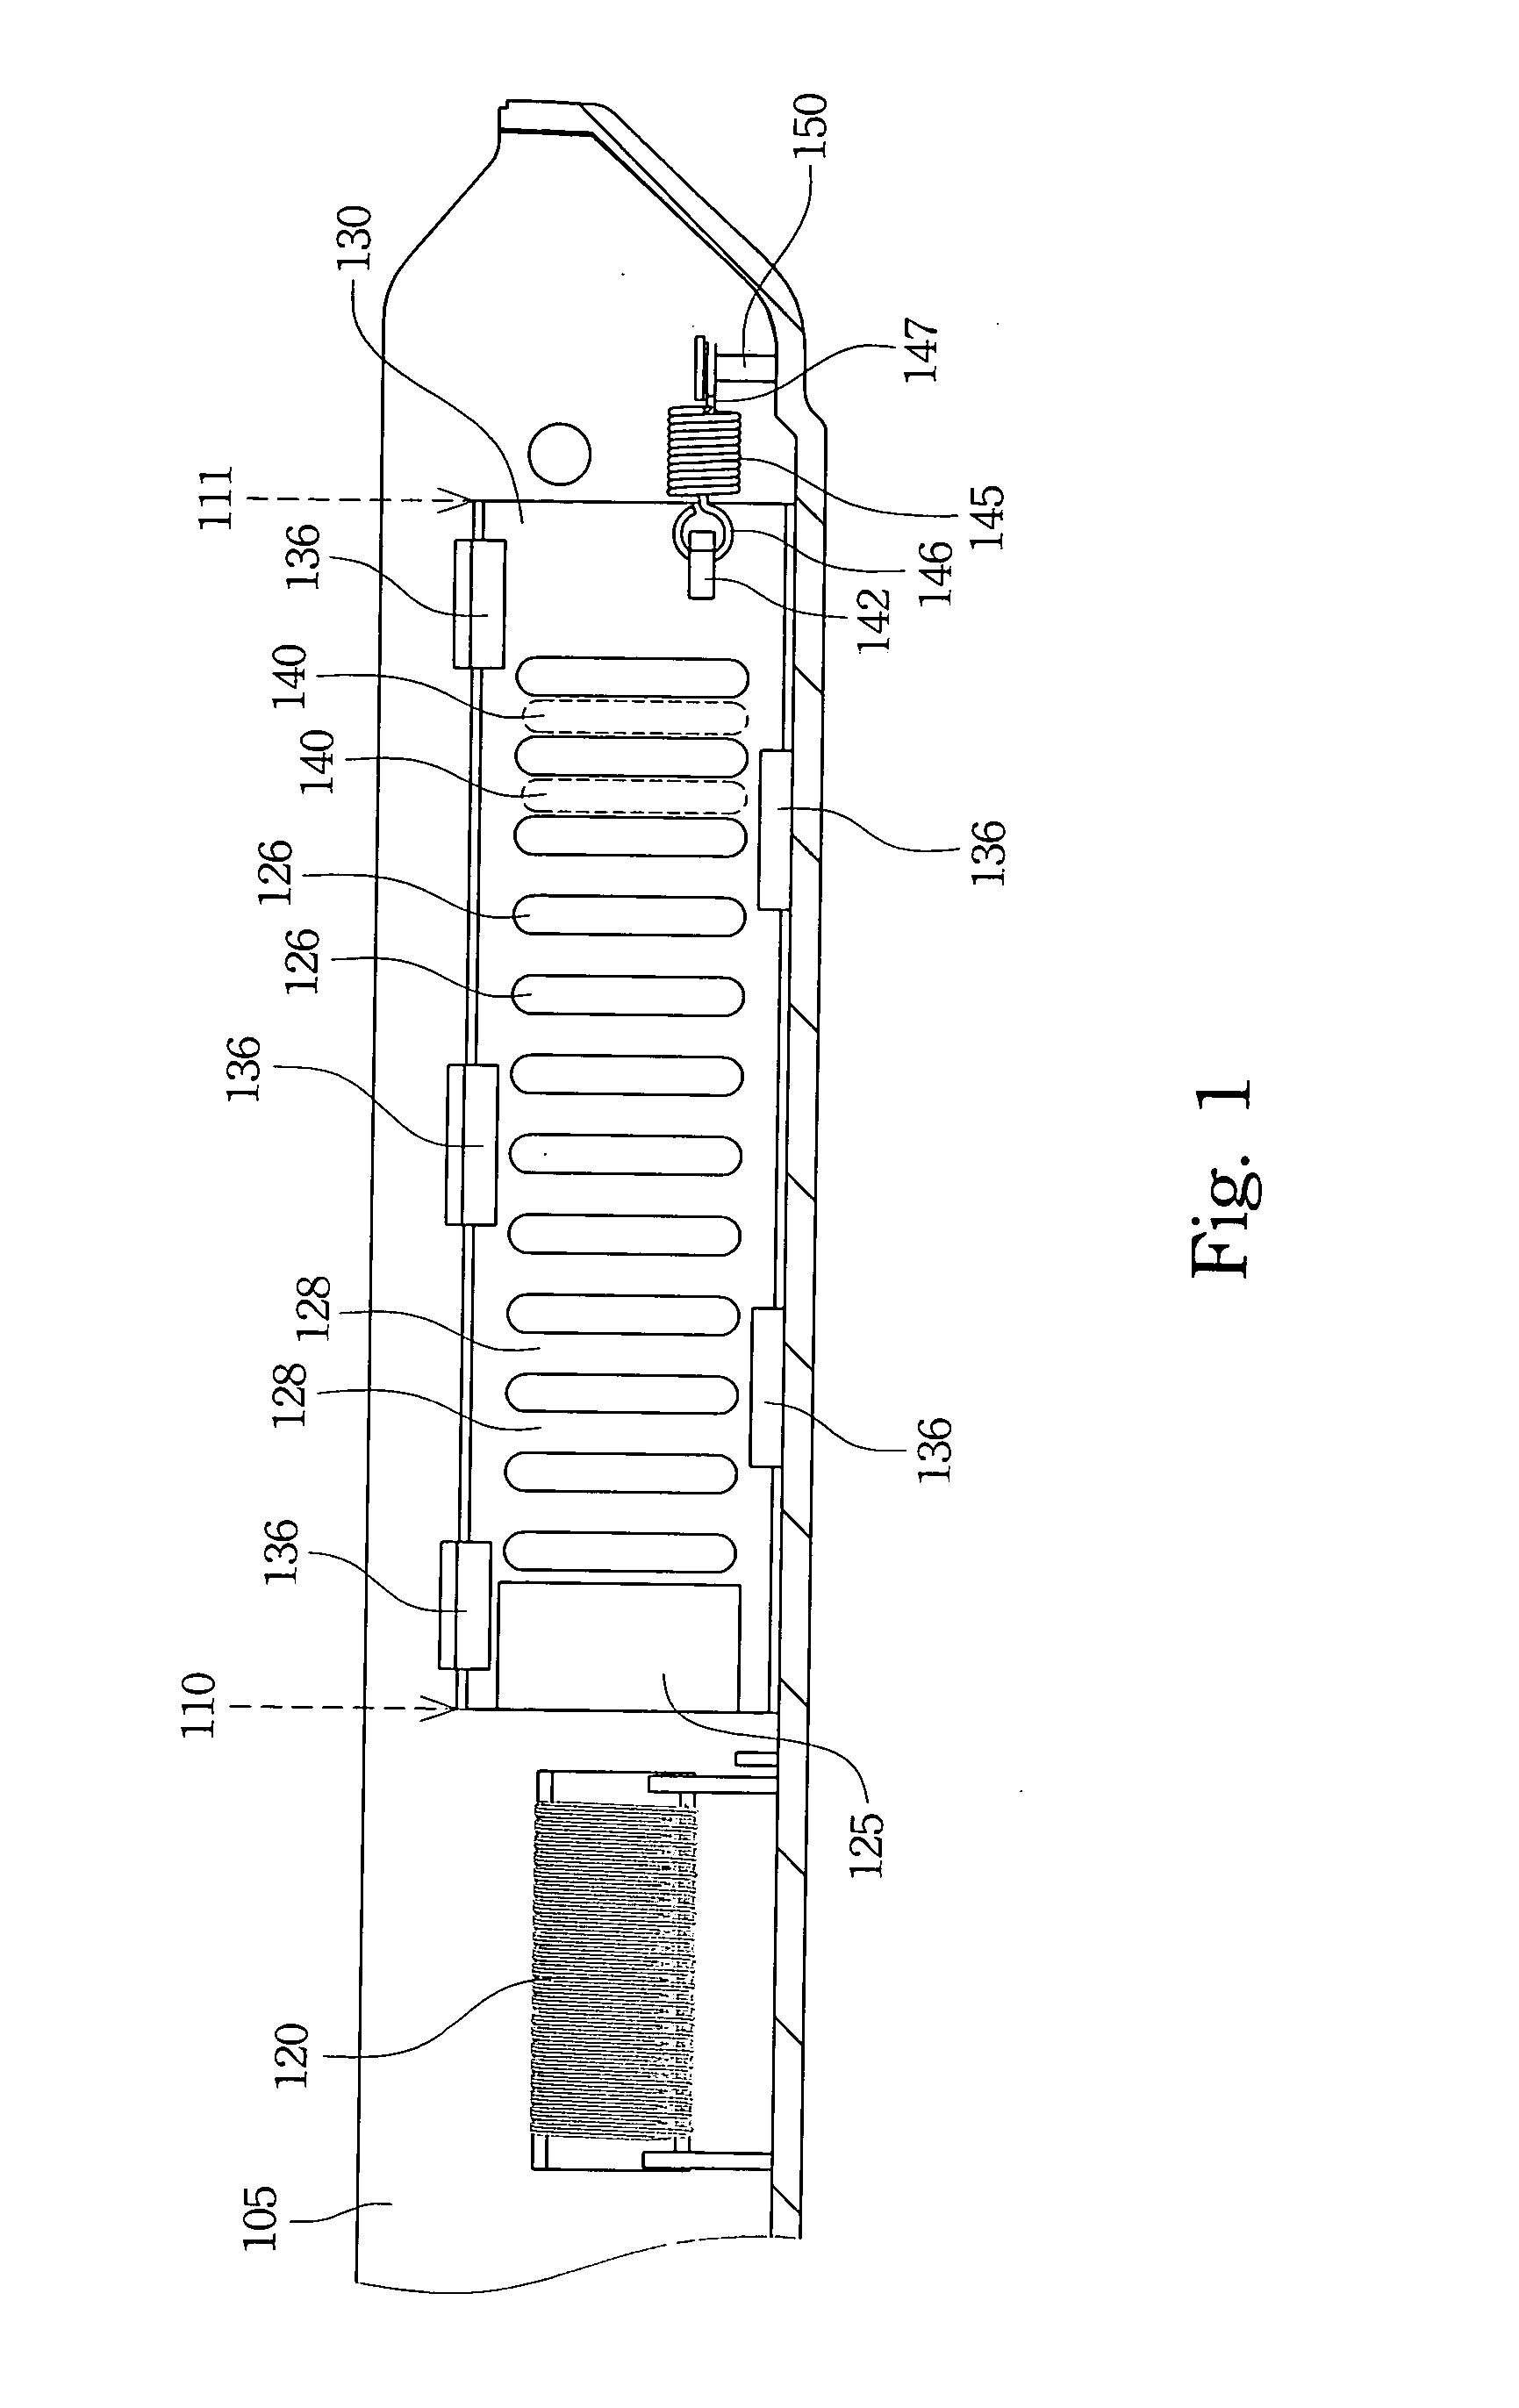 Electrical device with vents